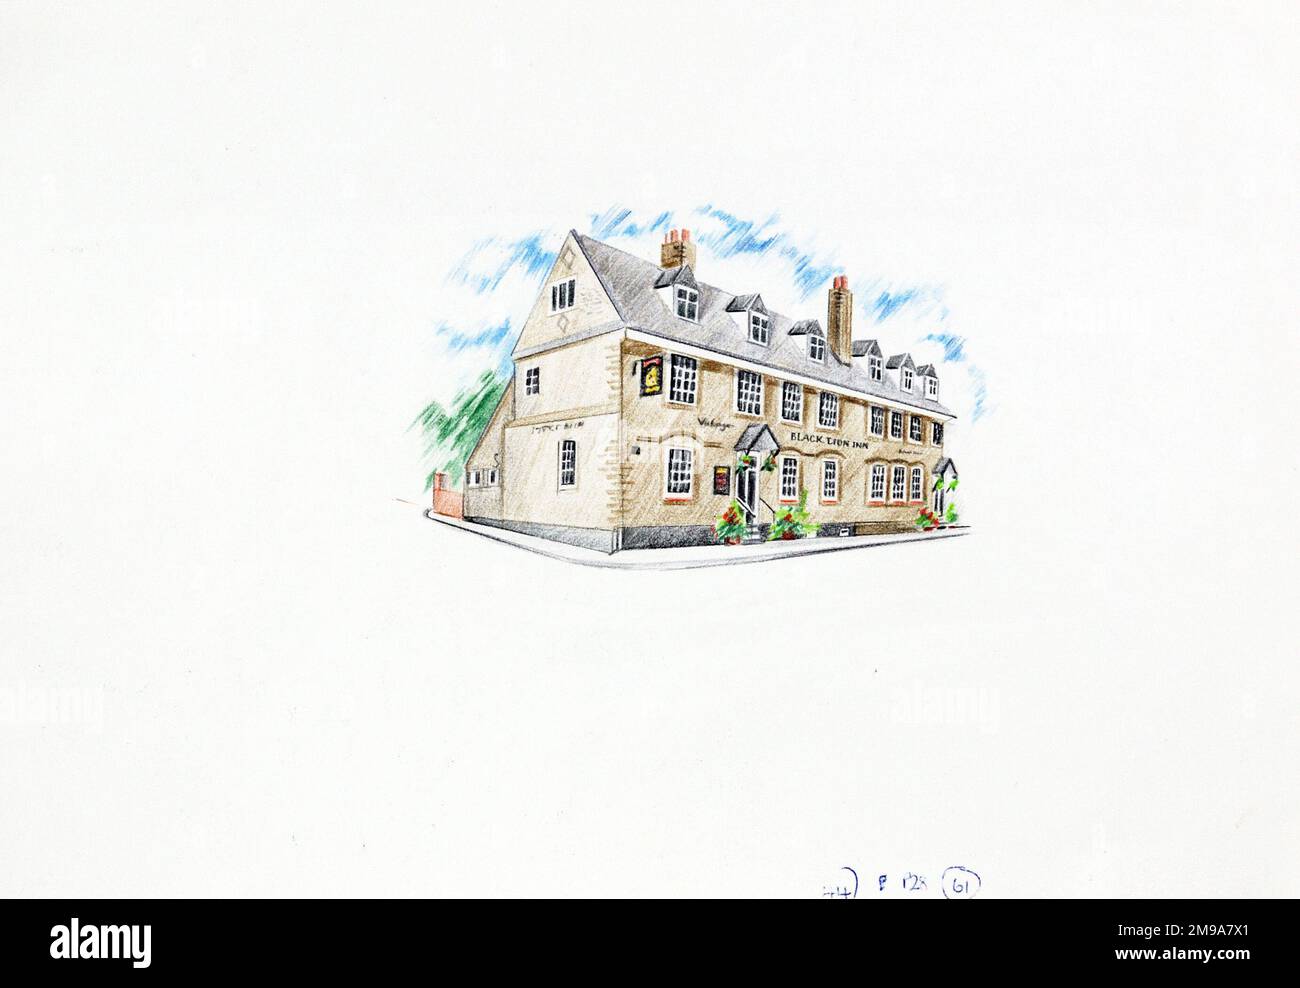 Sketch of  Black Lion Inn, St Albans, Hertfordshire. The main side of the print (shown here) depicts: Sketch of the pub.  The back of the print (available on request) details: Nothing for the Black Lion Inn, St Albans, Hertfordshire AL3 4SB. As of July 2018 . Pub permanently closed . Iconic Hotels Ltd Stock Photo